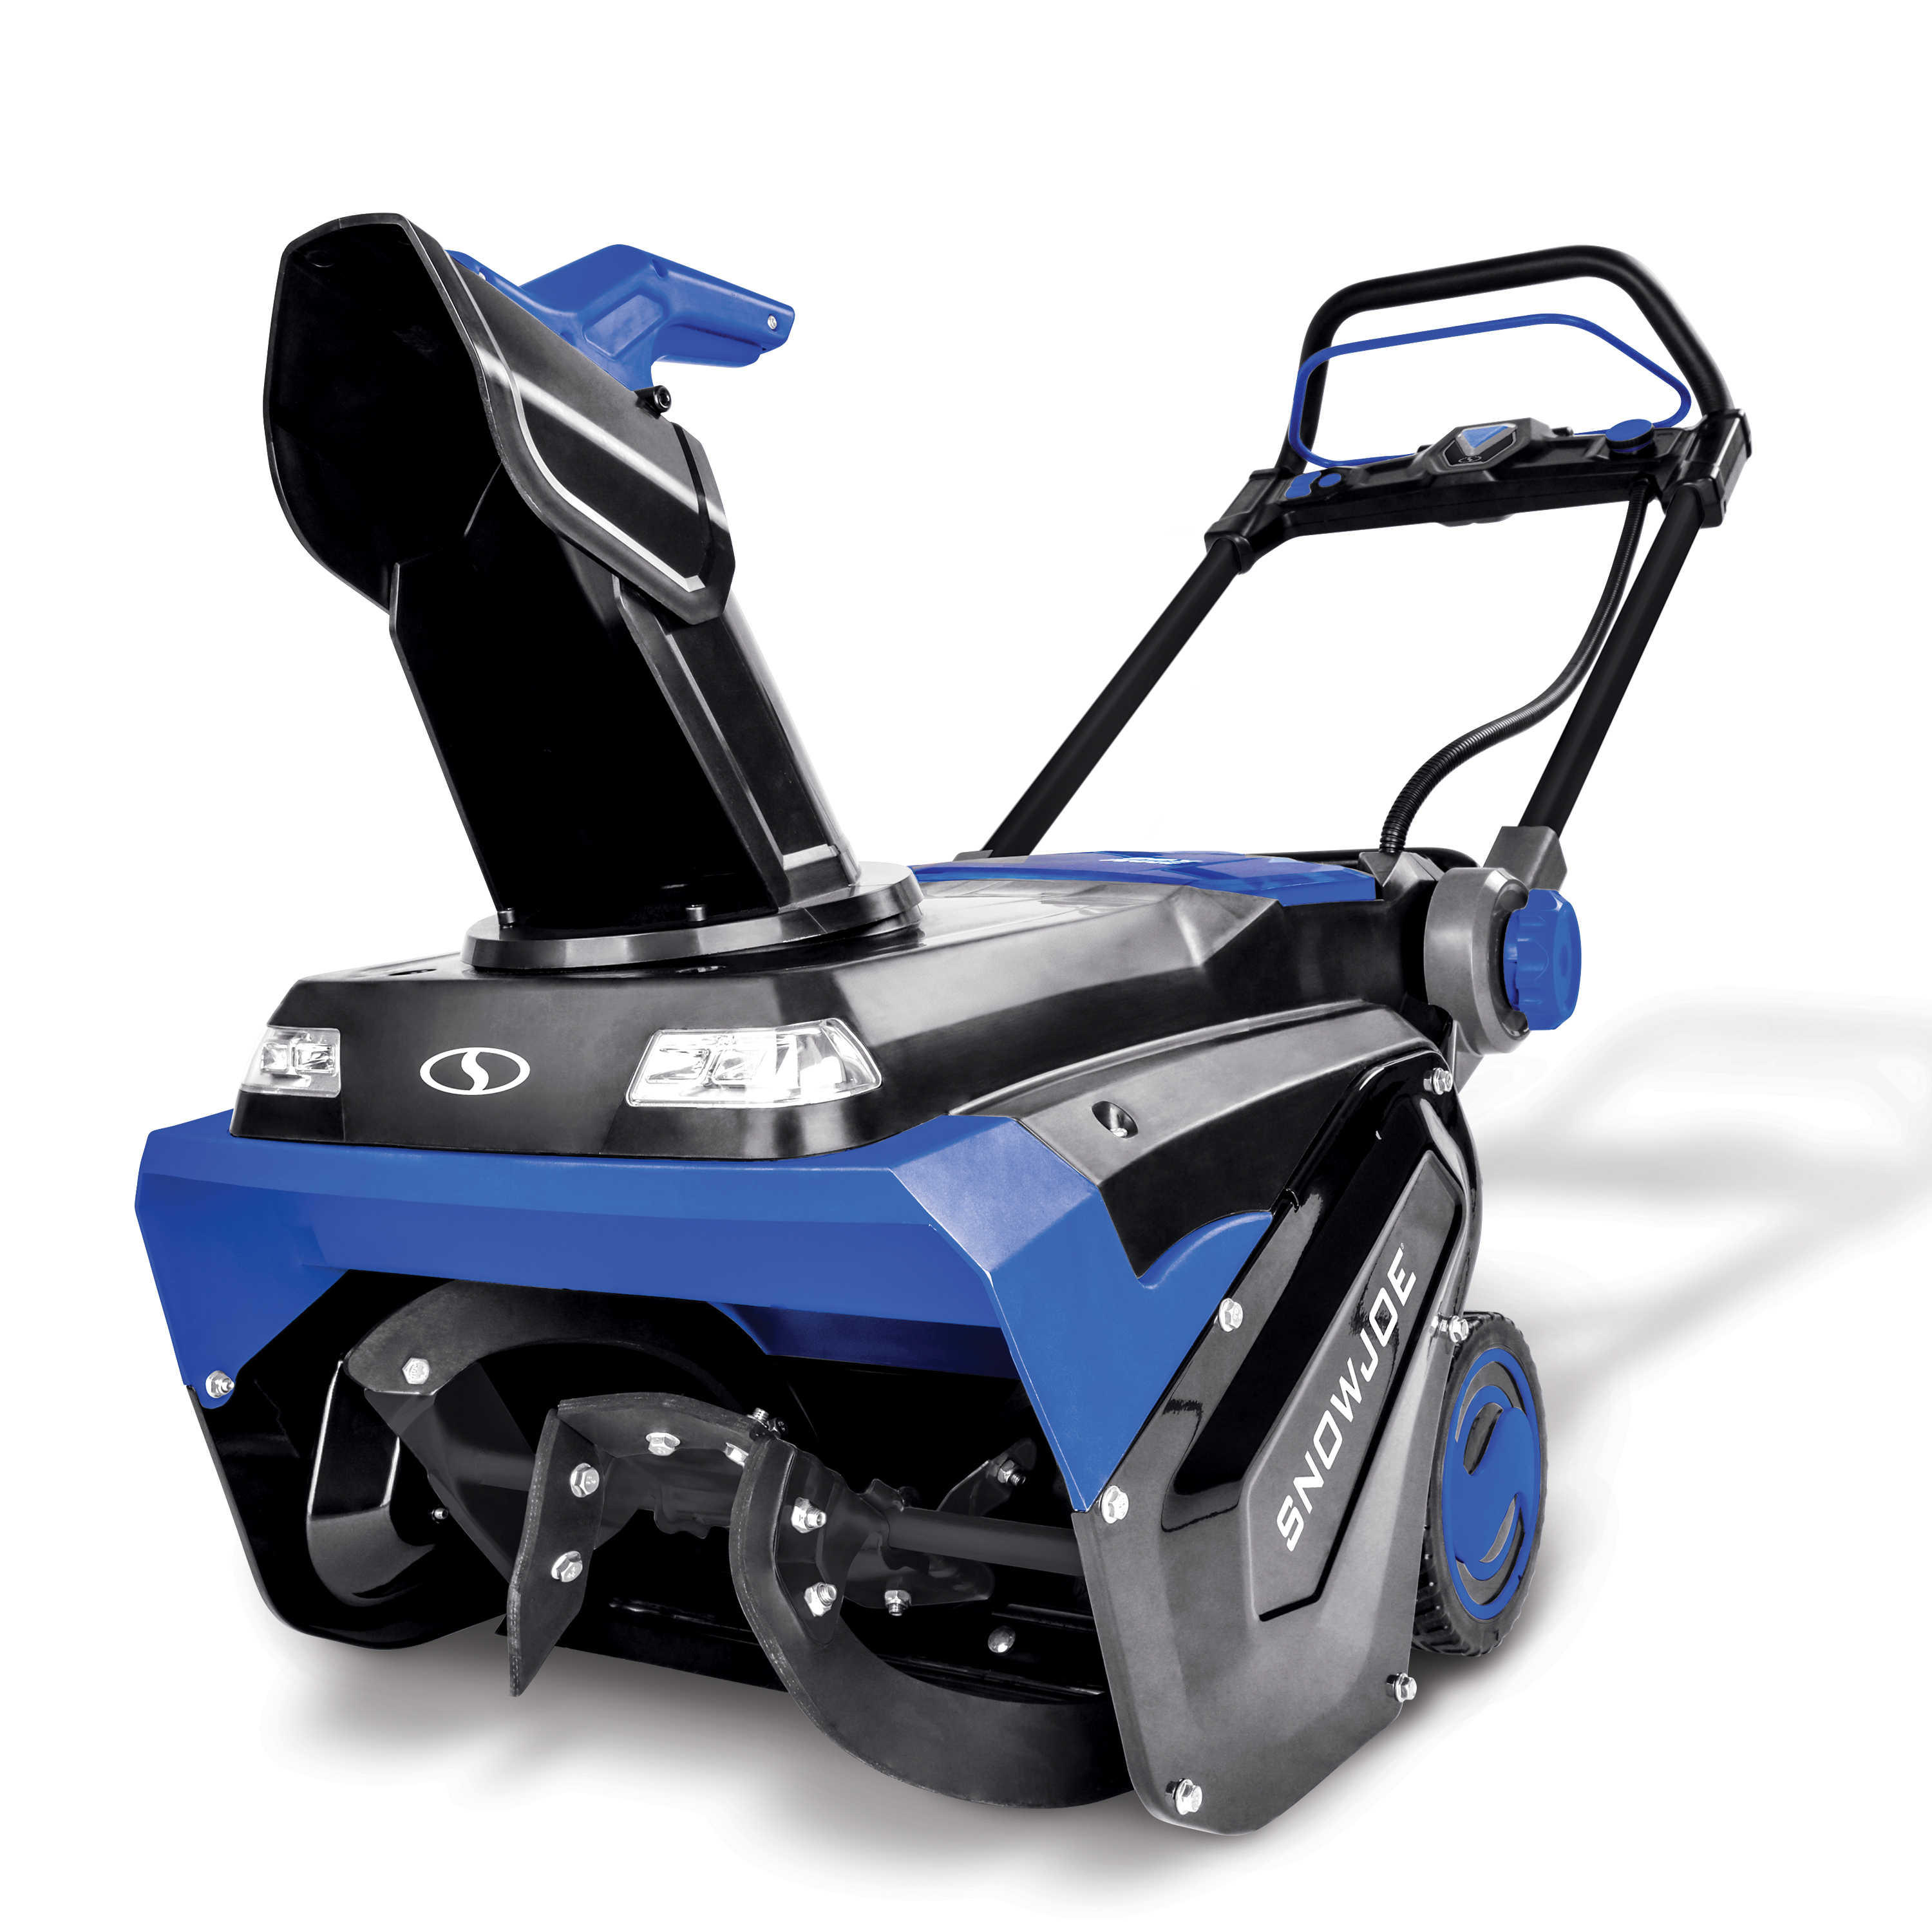 Snow Joe 96V 21-inch Brushless Single-Stage Cordless Snow Blower, 4 x 12.0-Ah Batteries & 2 x Chargers - image 2 of 7